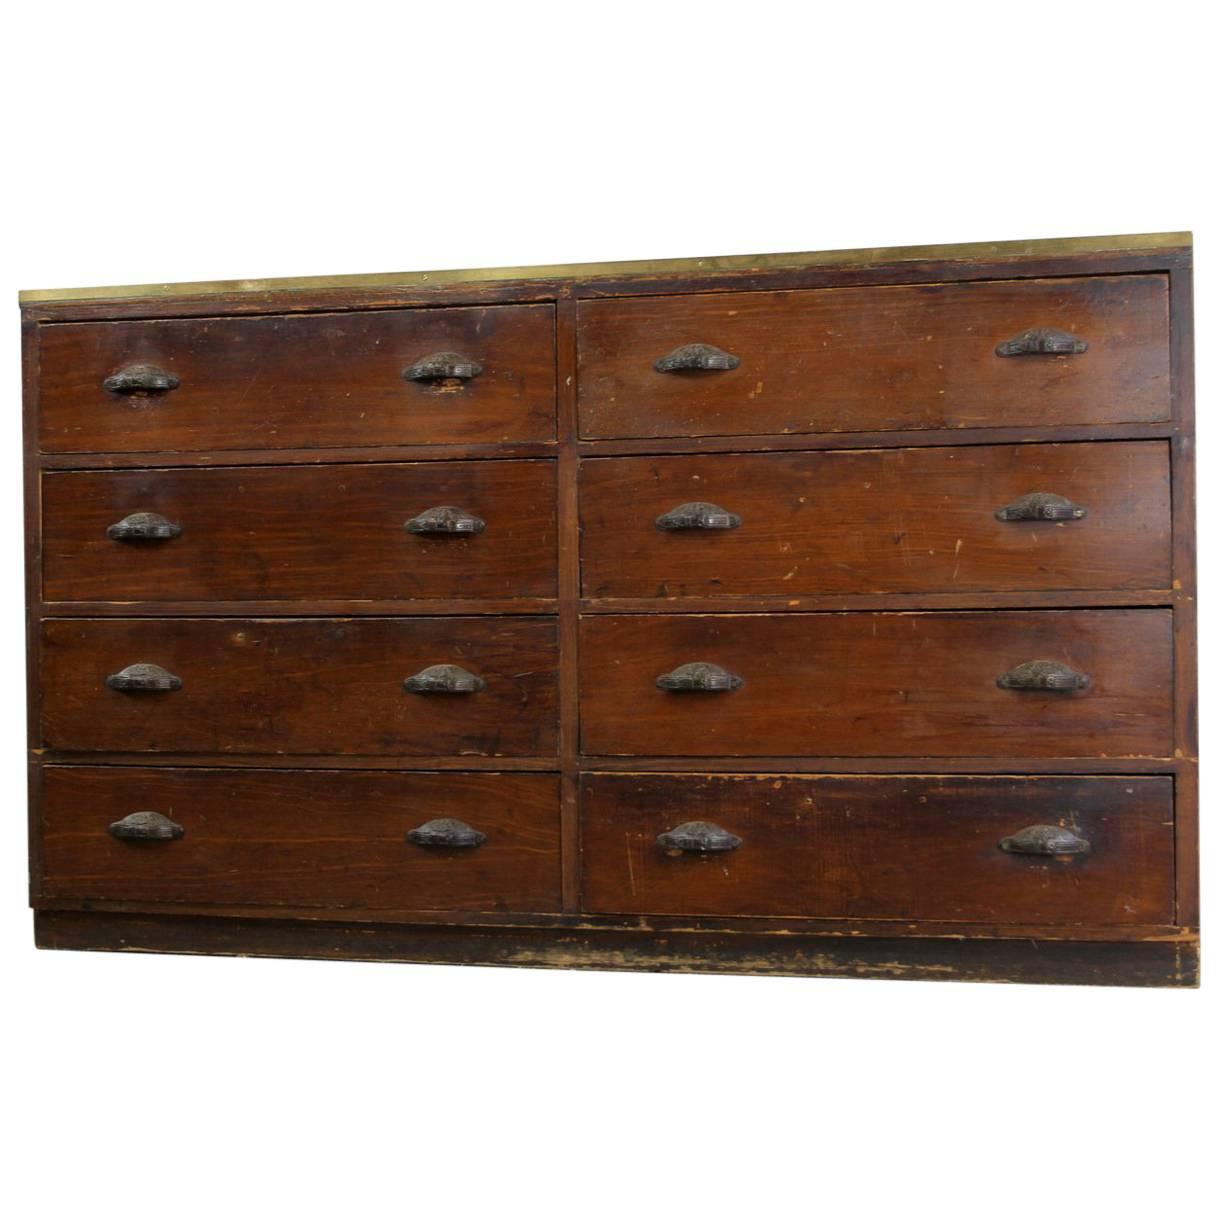 Early 20th Century Dutch Tailors Drawers, circa 1900